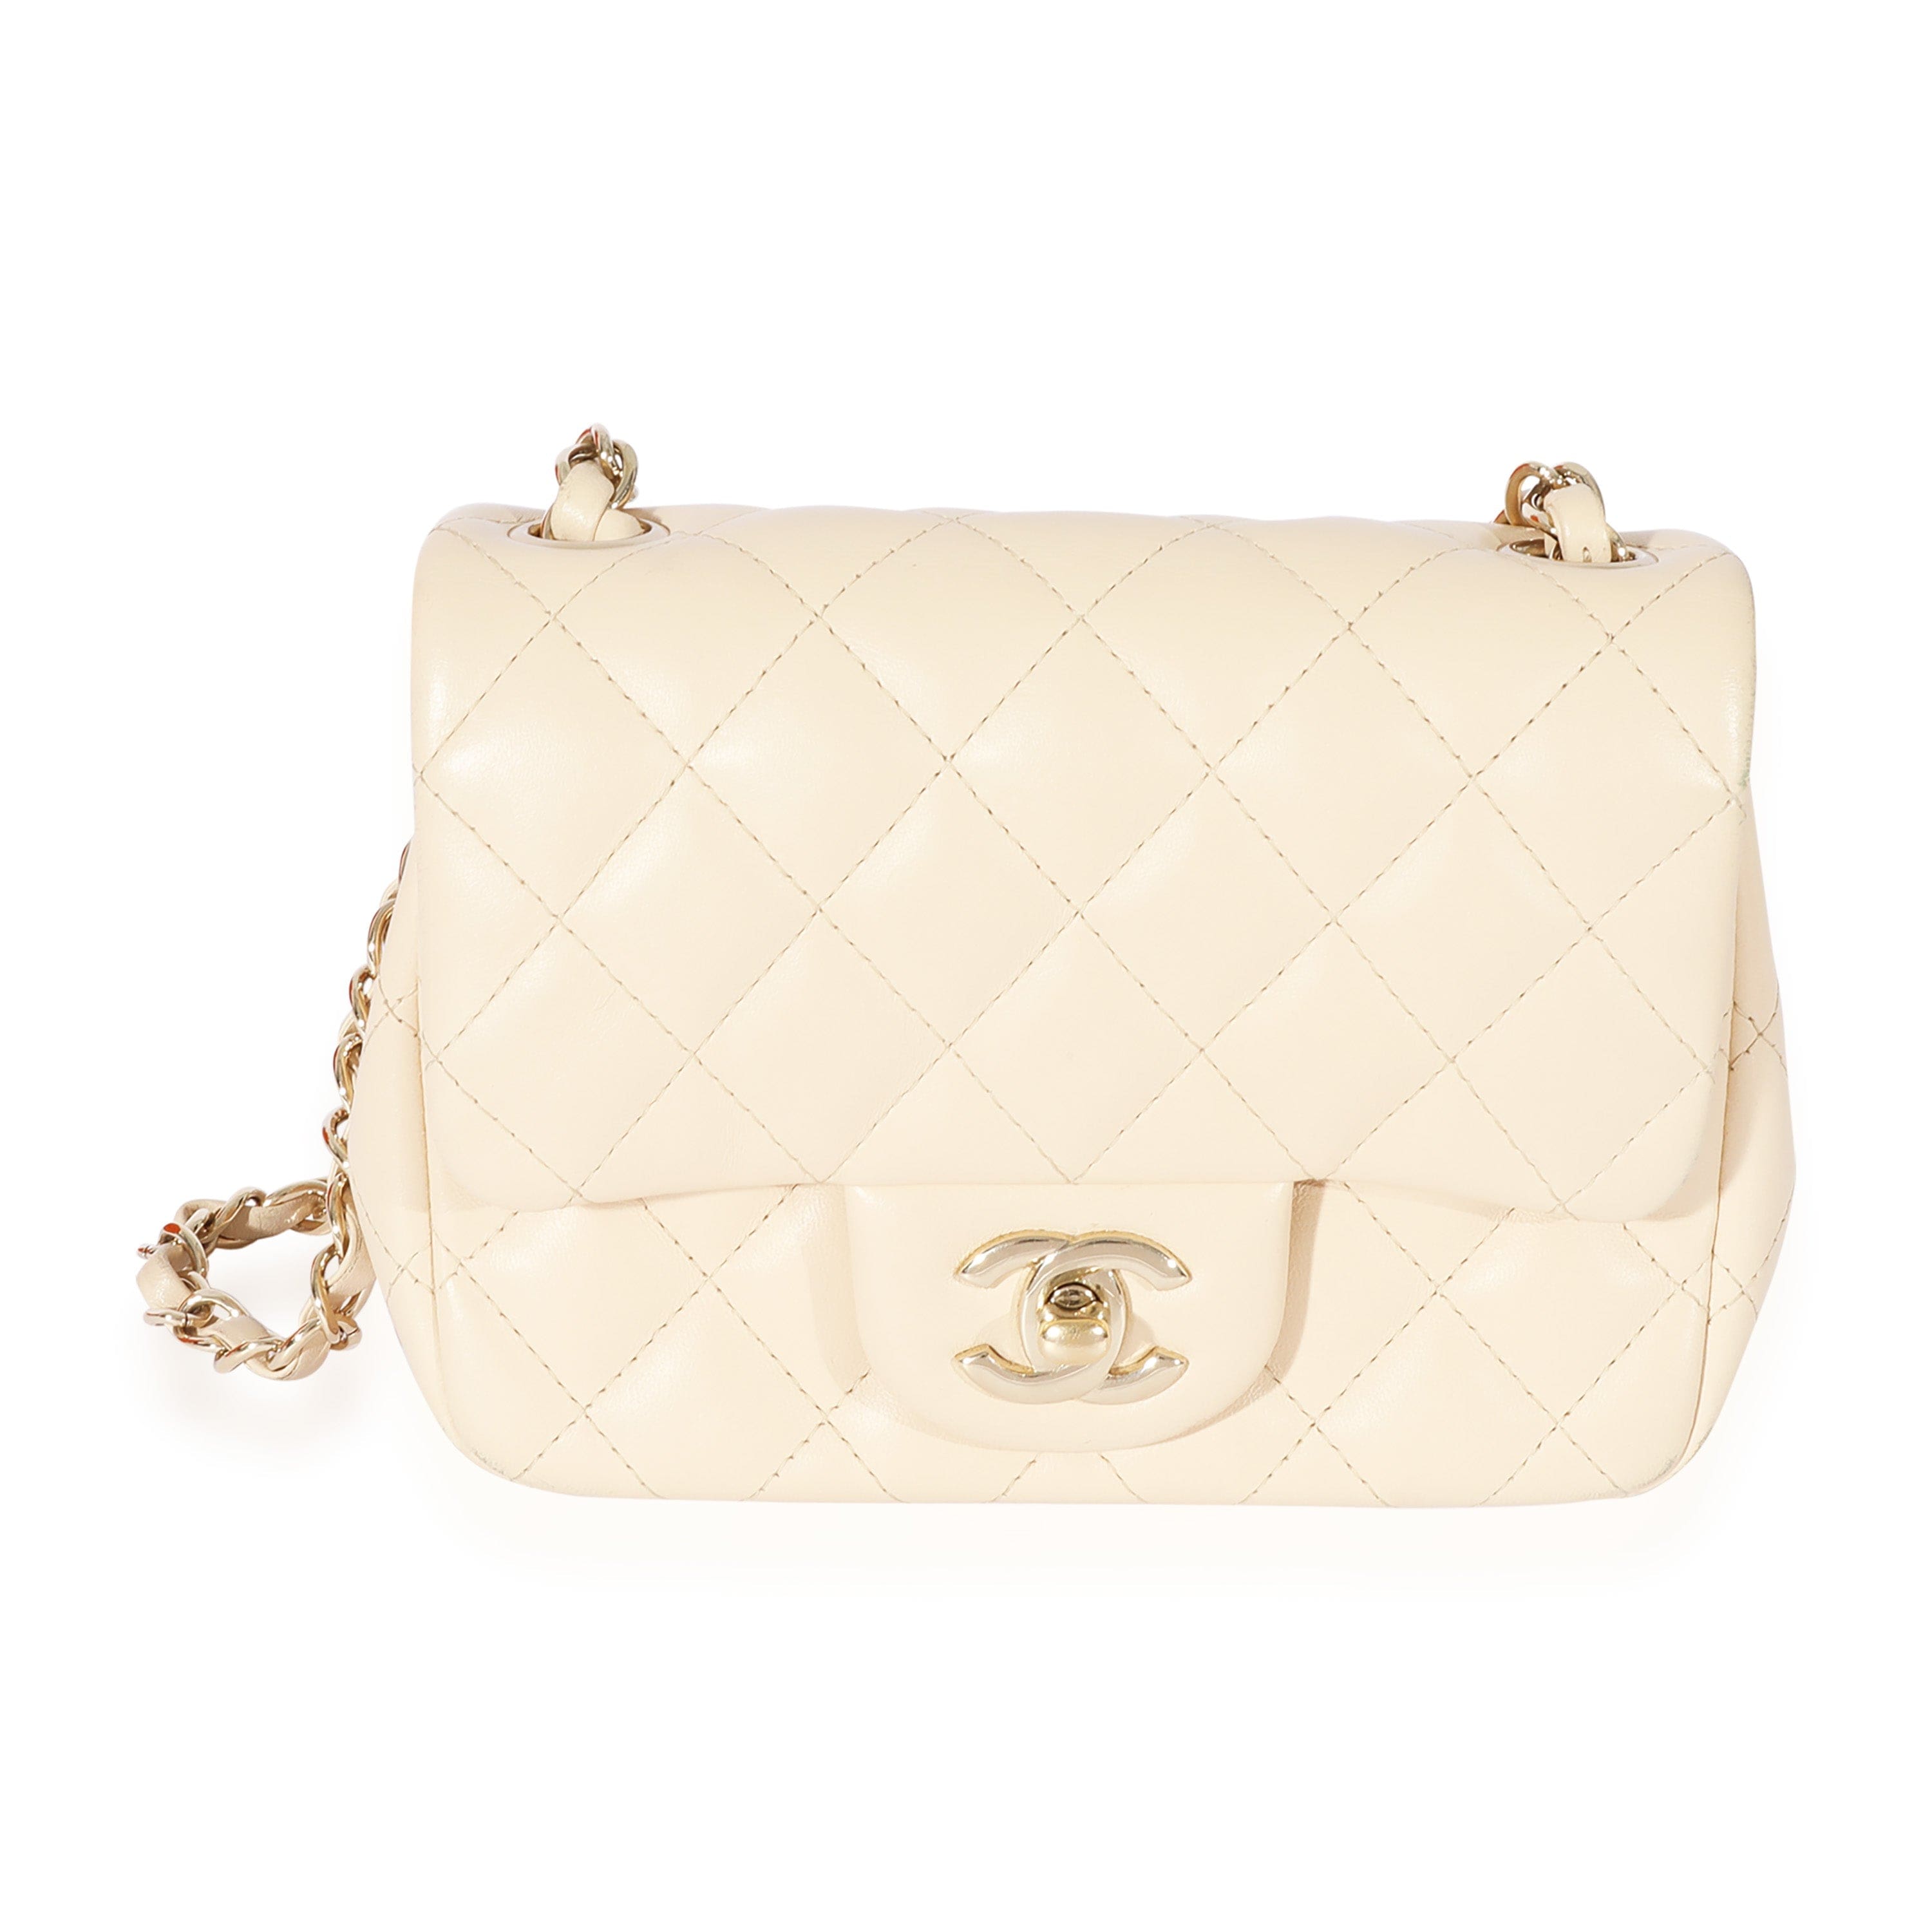 Chanel Chanel Beige Quilted Lambskin Mini Square Classic Flap Bag